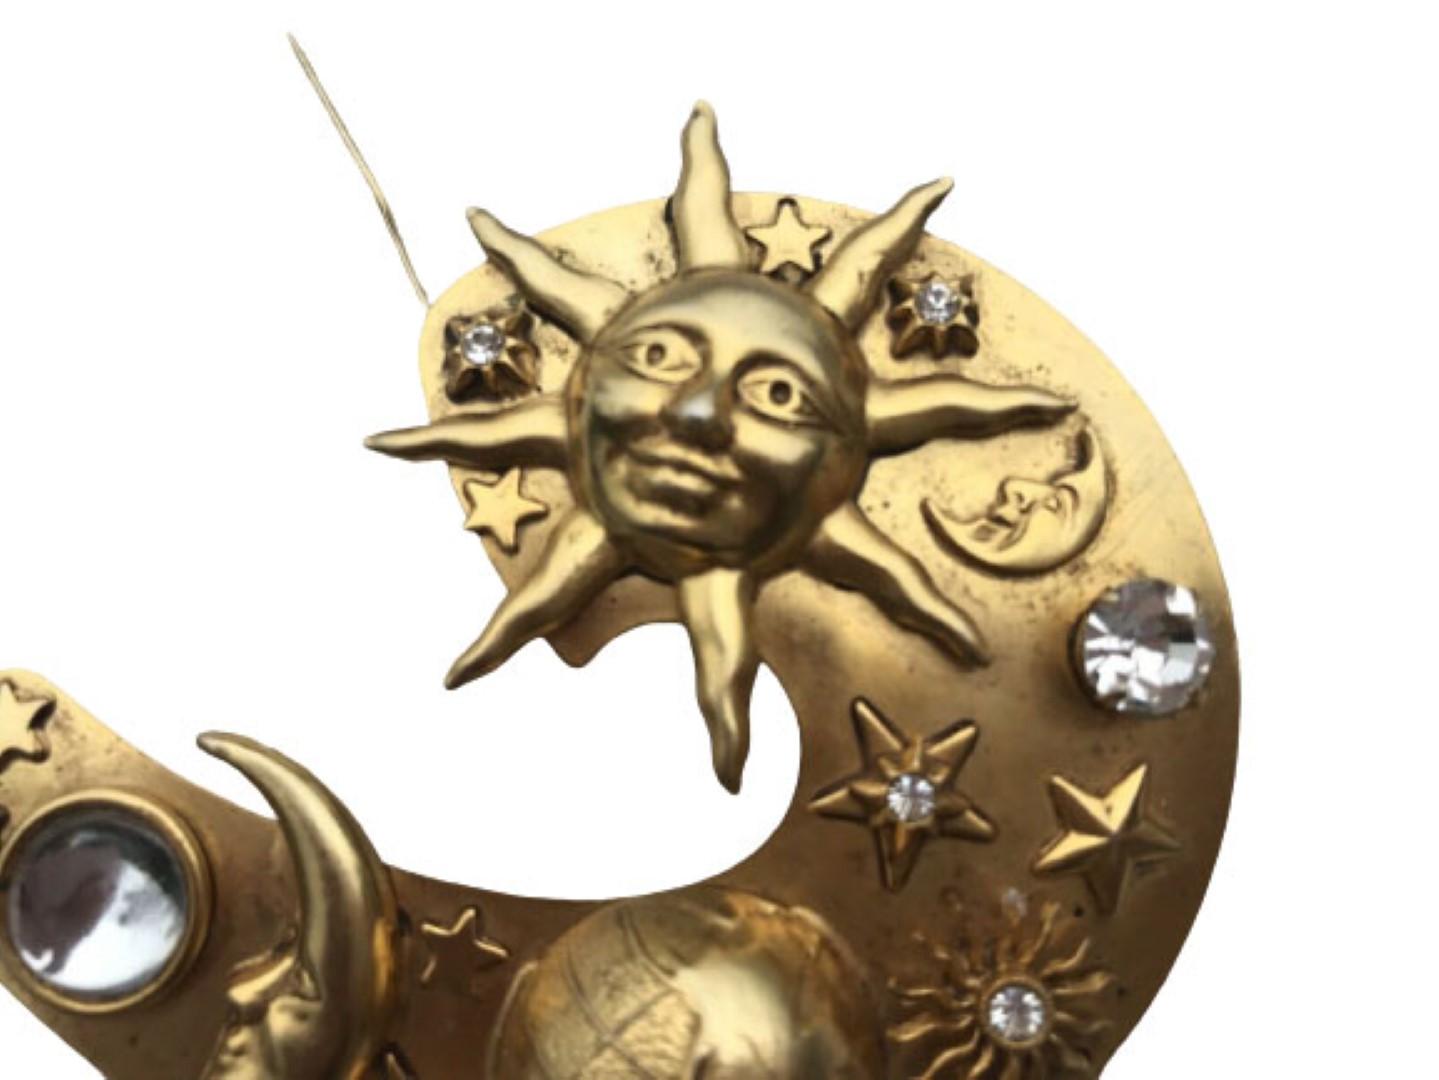 Beautiful and Stylish Rare Astrological Sun Moon and Planet Brooch by Askew of London with Diamante accents. Gold tone. Measuring approx. 3